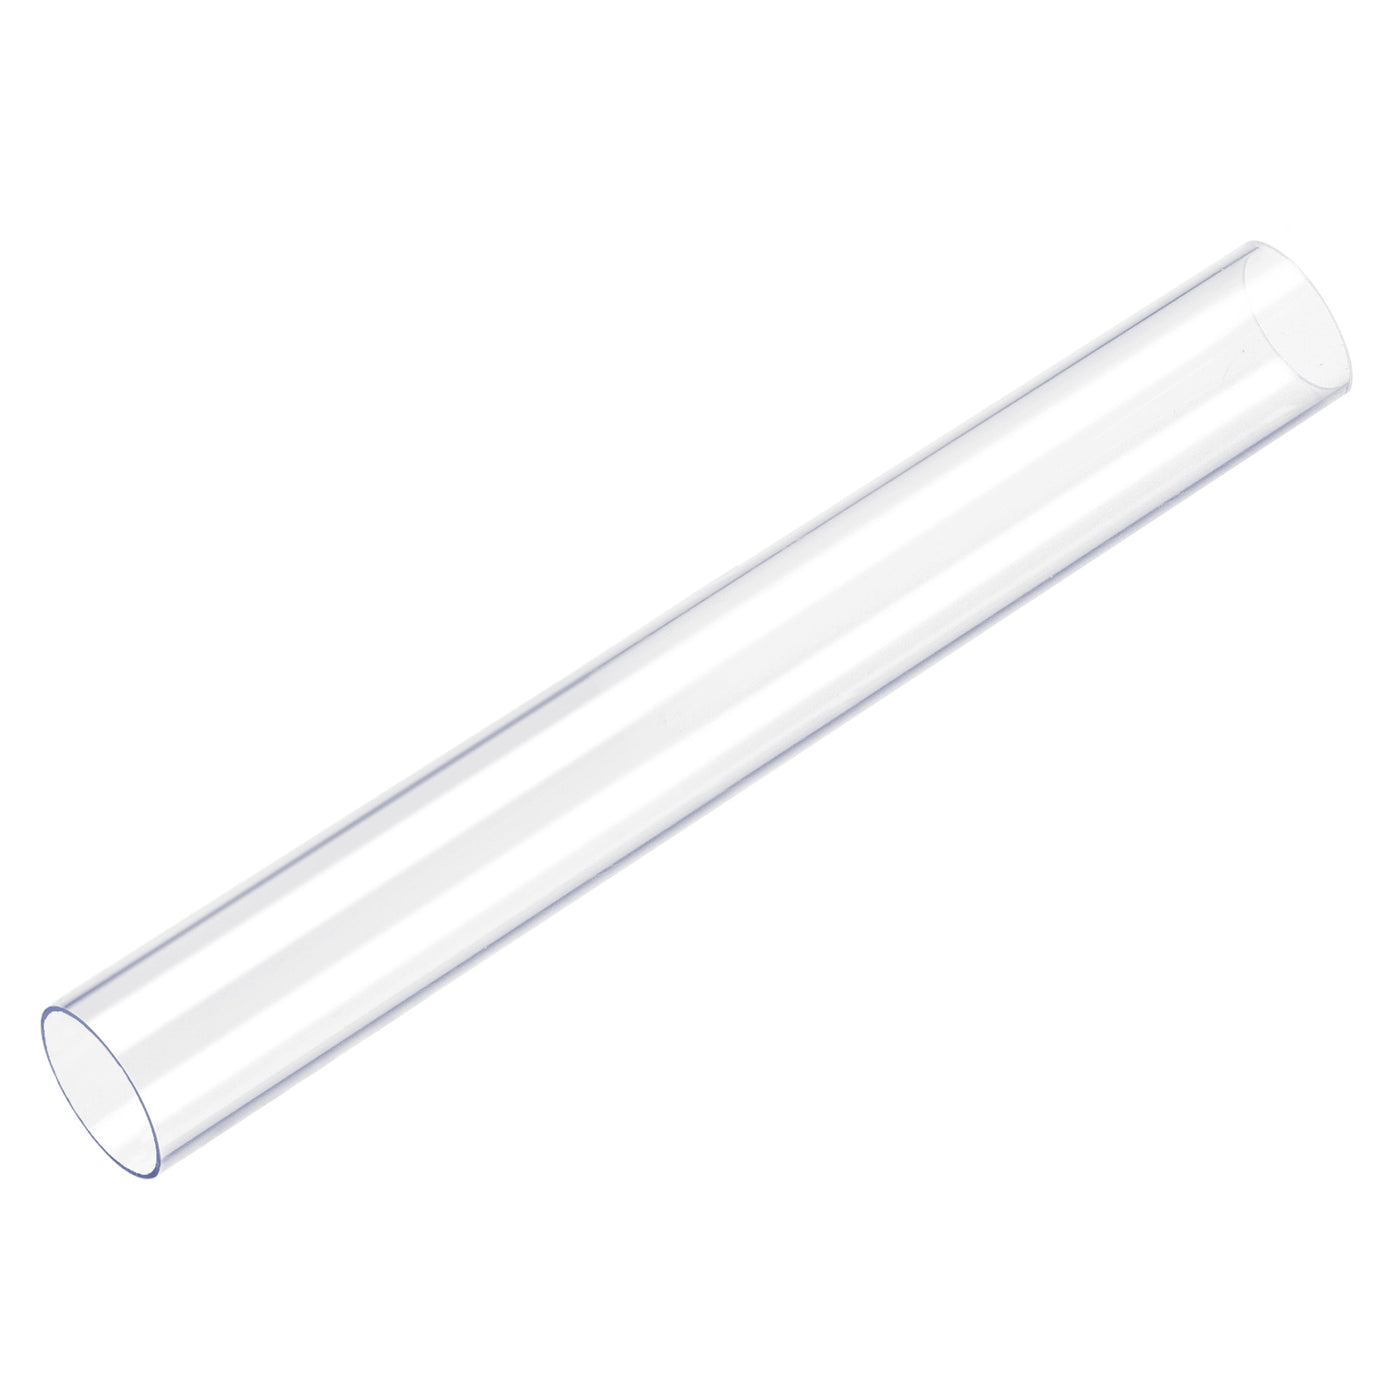 uxcell Uxcell Polycarbonate Rigid Round Tubing Plastic Tube